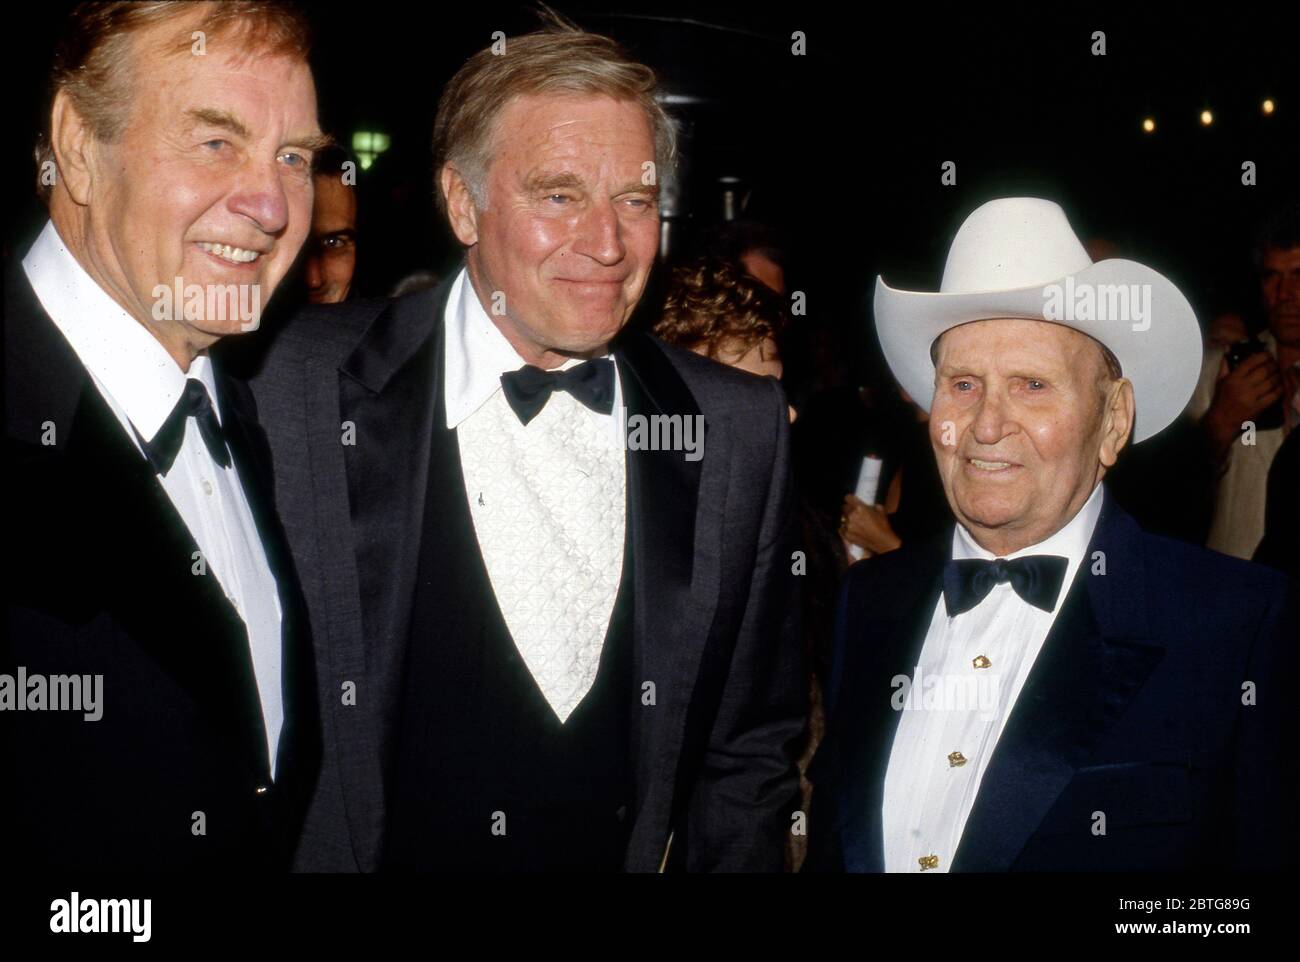 George Montgomery, Charlton Heston, and Gene Autry at event at the Gene Autry Museum in Los Angeles, CA circa 1990. Stock Photo